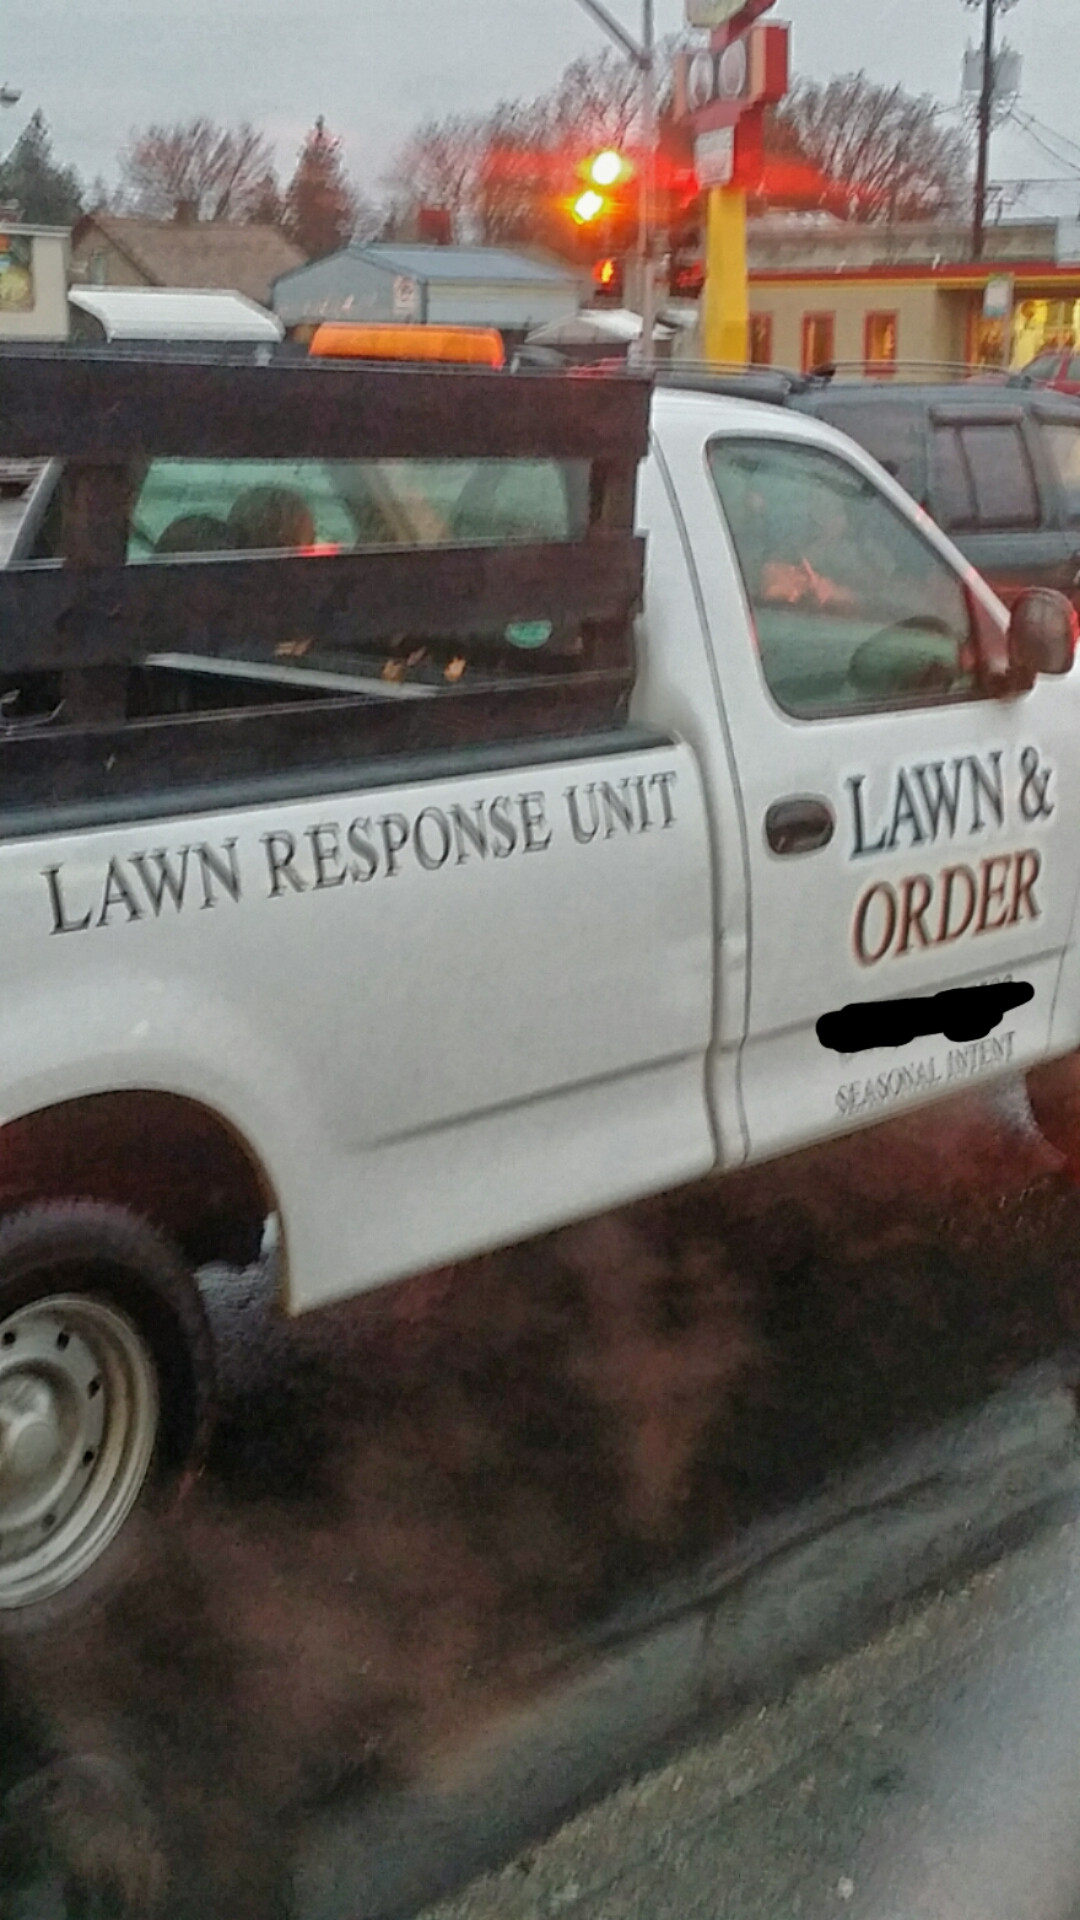 A lawn care company with a sense of humor.